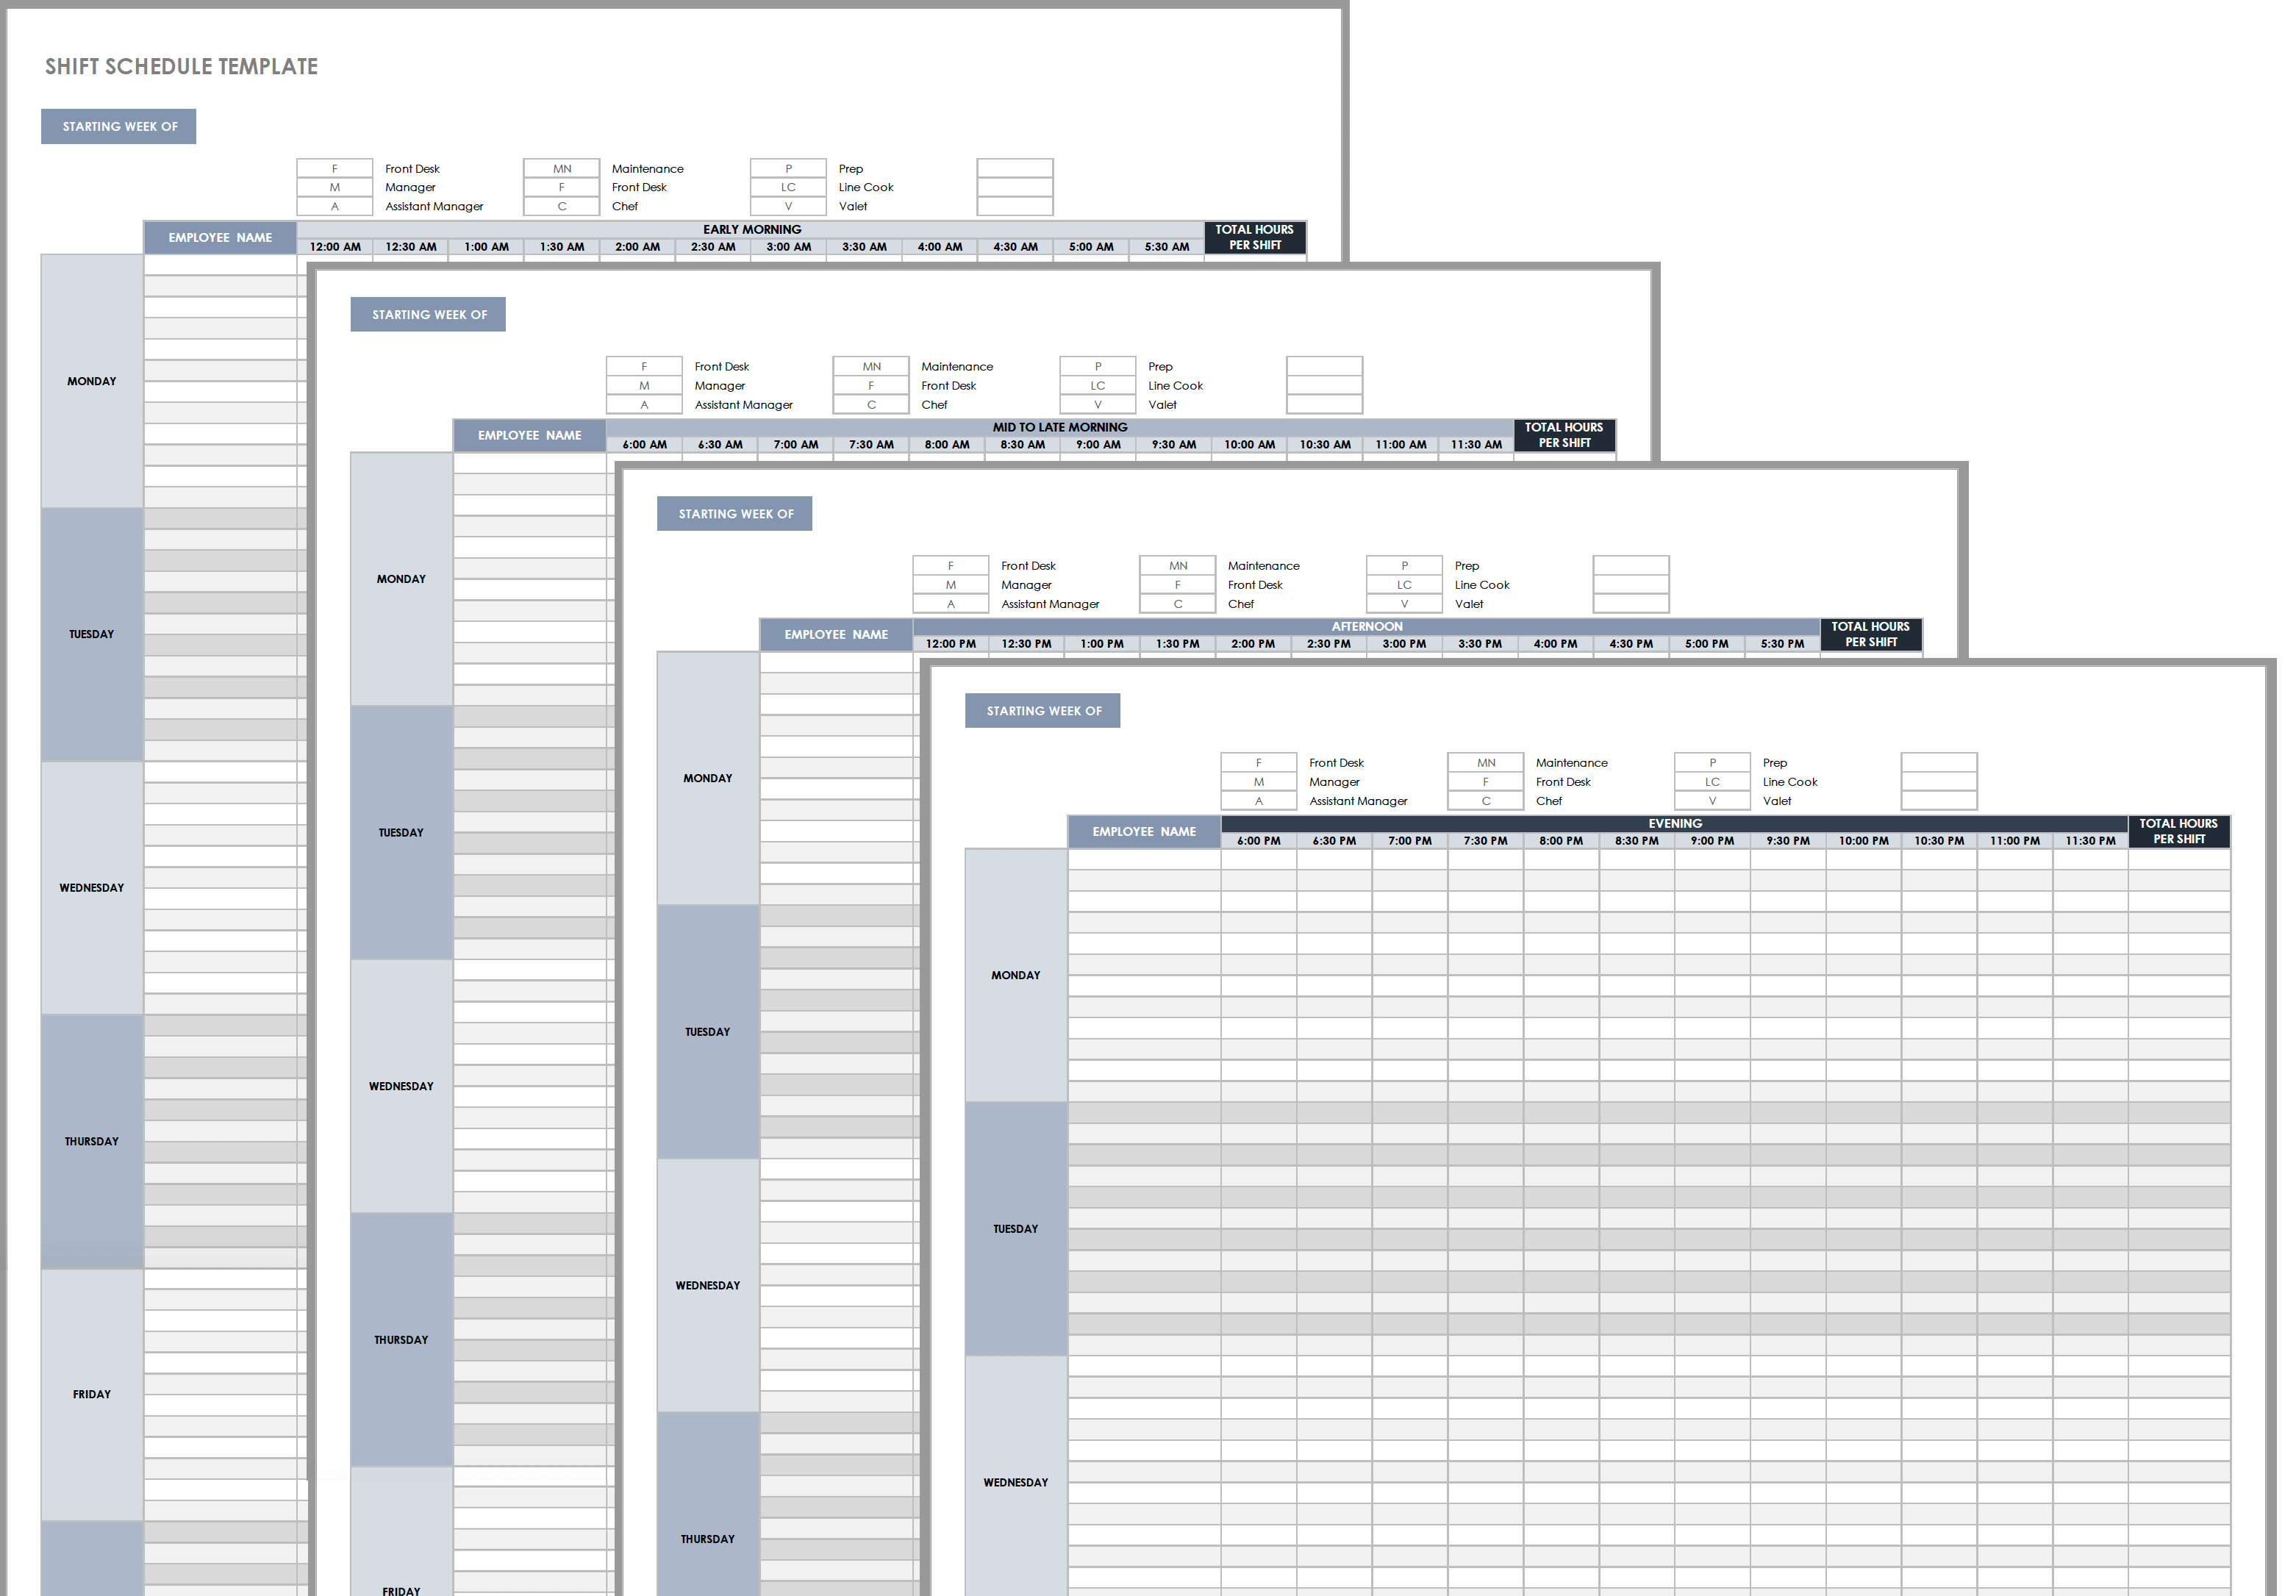 excel daily work schedule template